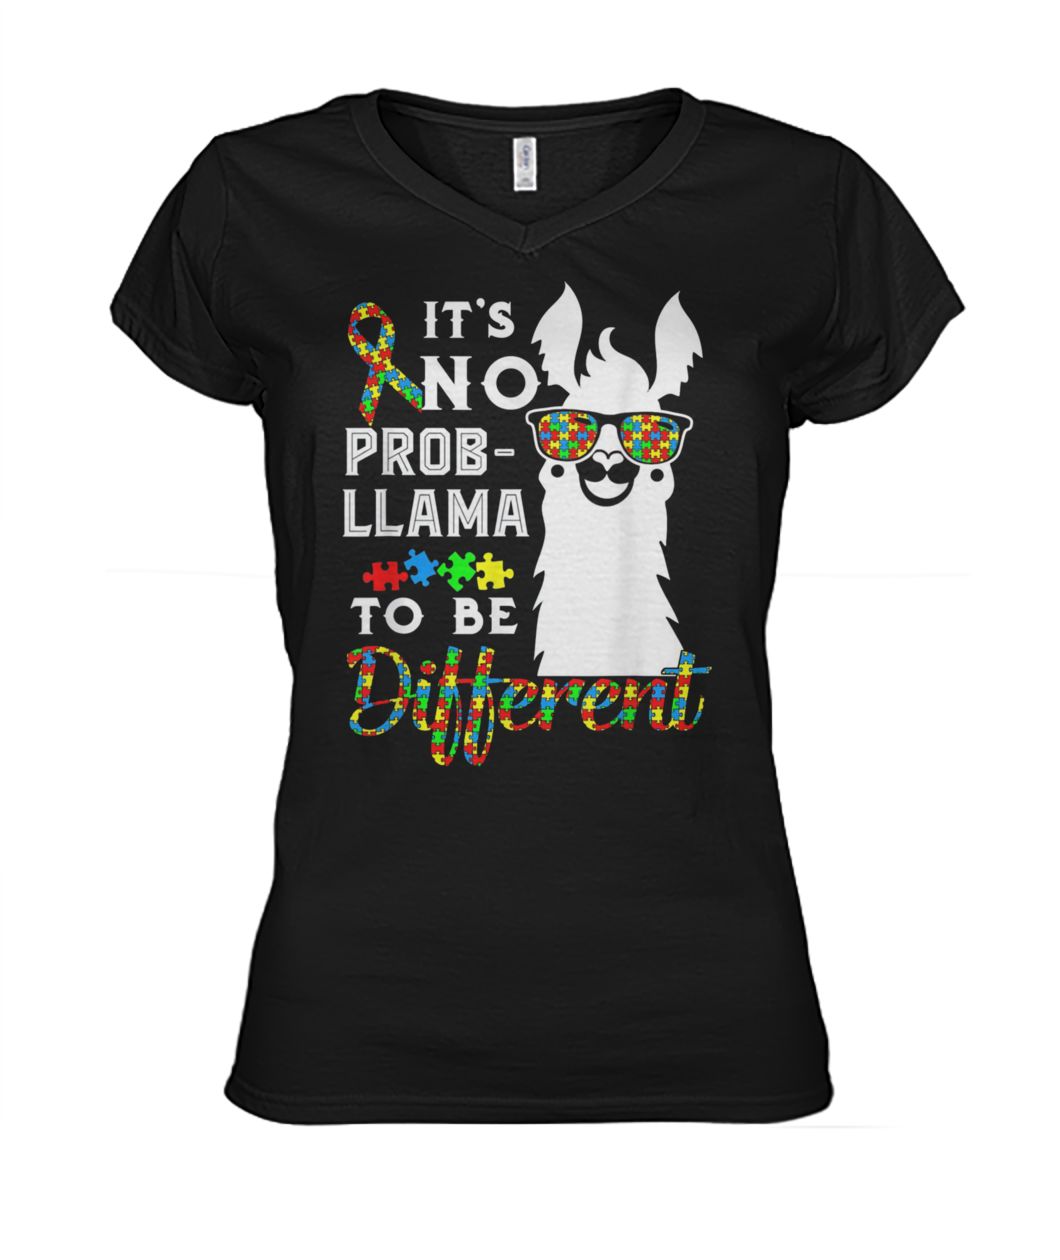 Autism awareness it's no prob-llama to be different women's v-neck